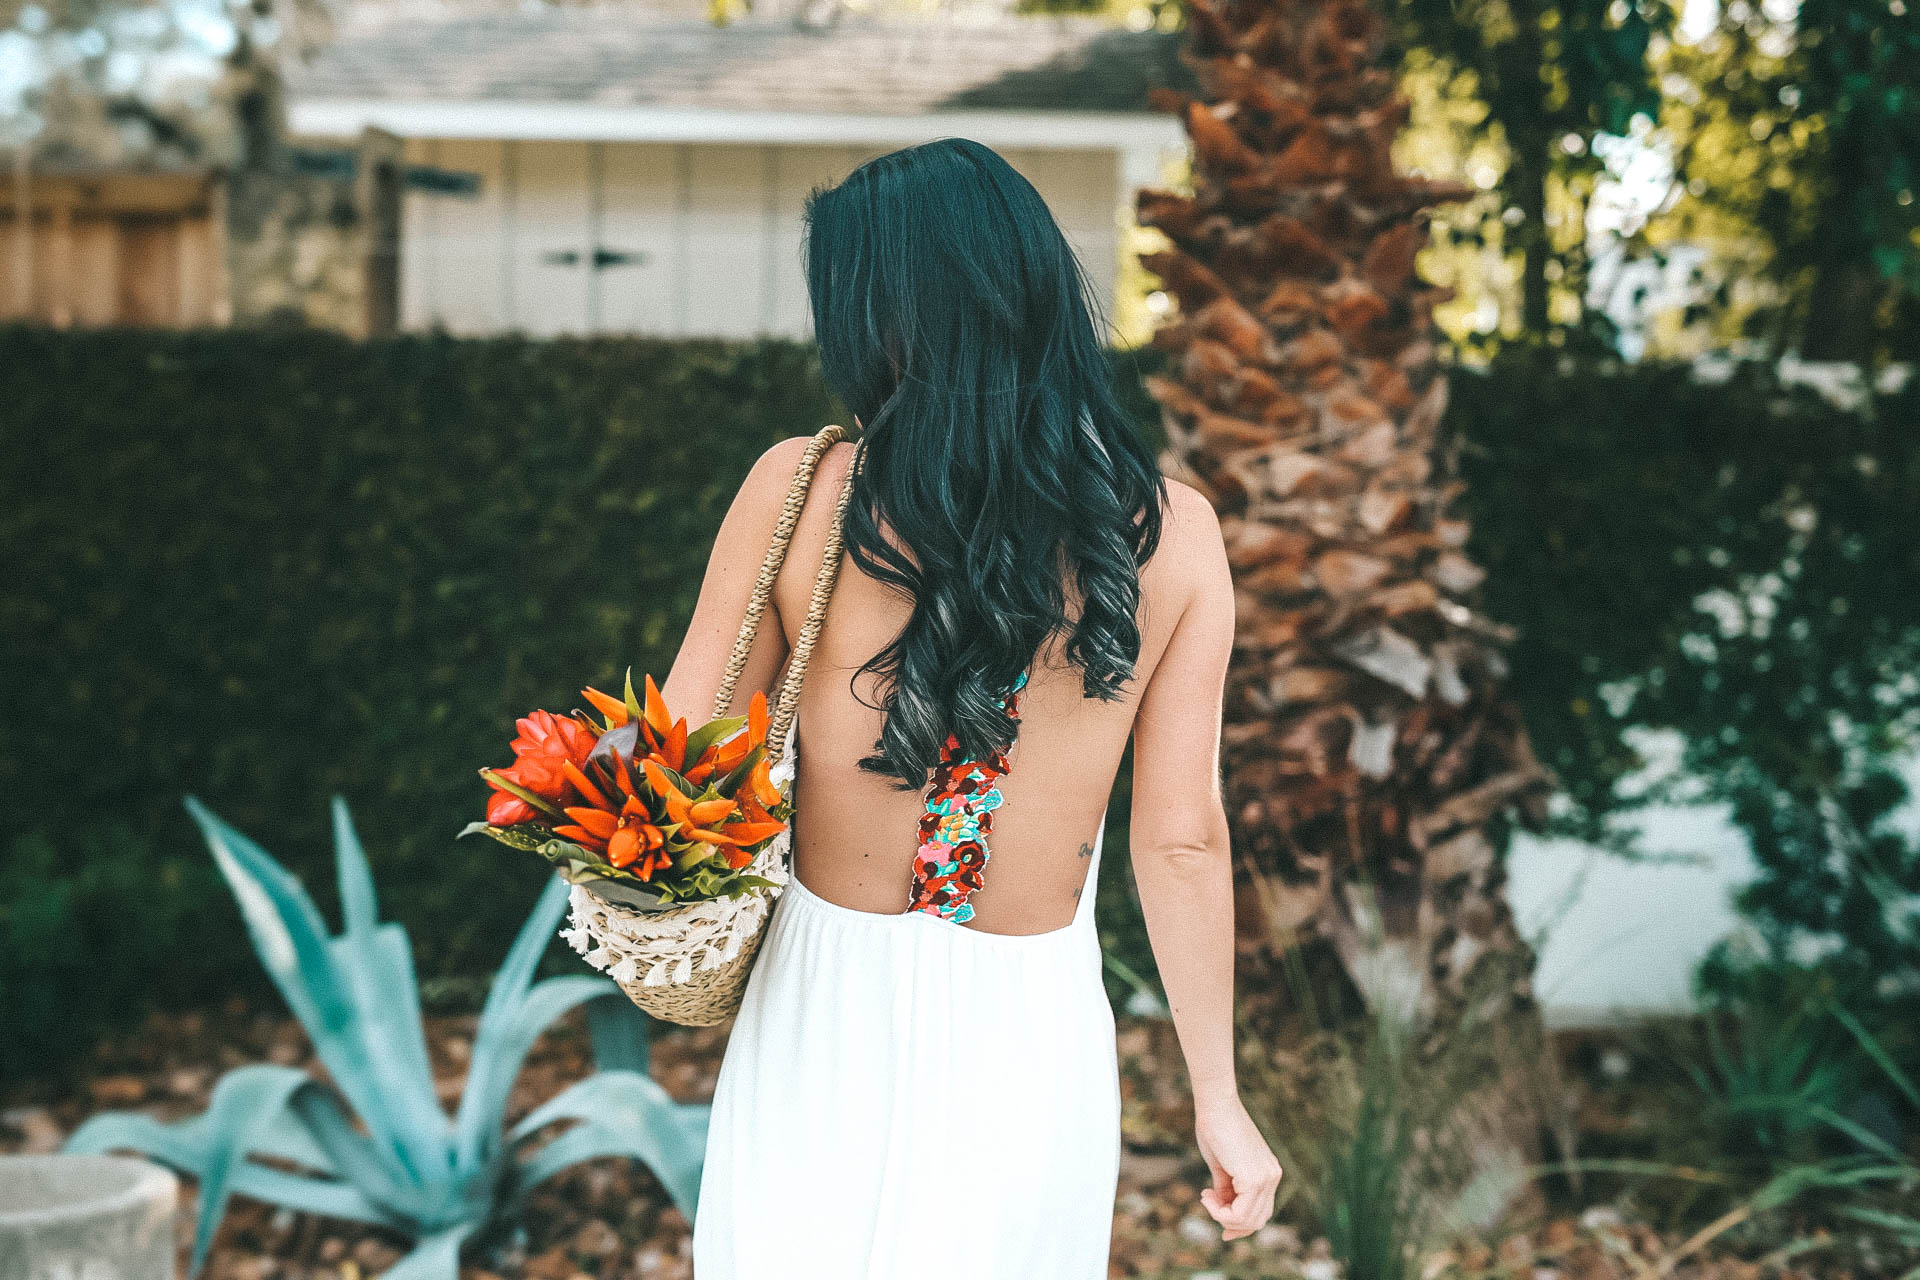 swim coverup | Straw bag is from Express and the bouquet is from The Bouqs. | white maxi dress | summer maxi dress || DTK Austin #fashion #style #maxidress #summerdress #whitemaxidress #dtkaustin - {Show Me Your Mumu Maxi Dress} featured by popular Austin fashion blogger Dressed to Kill